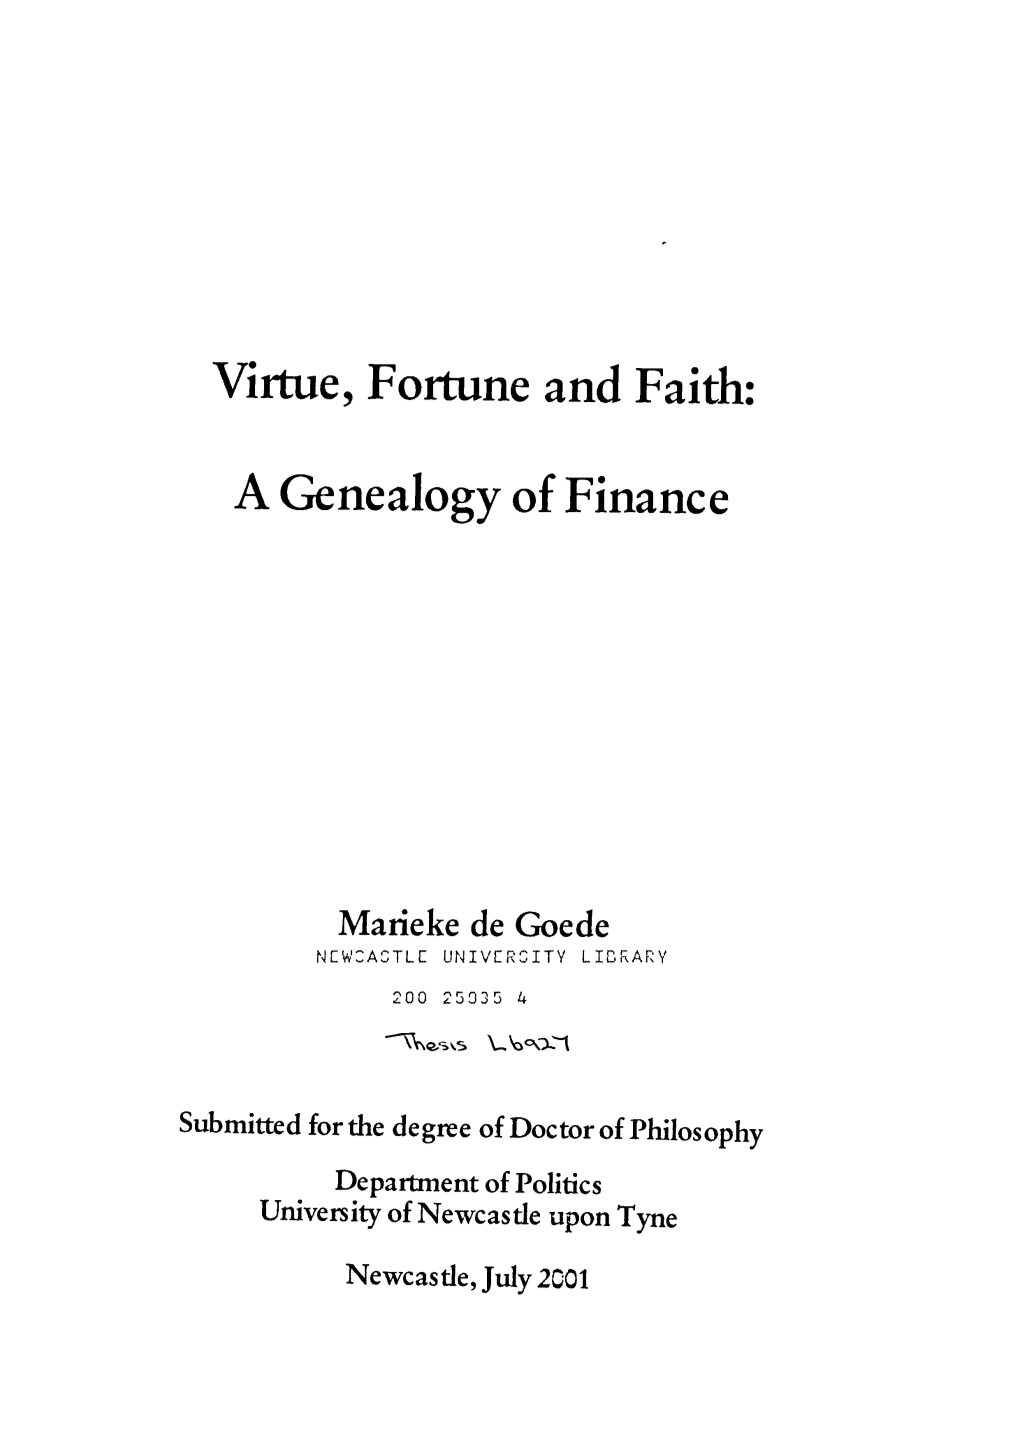 Virtue, Fortune and Faith: a Genealogy of Finance